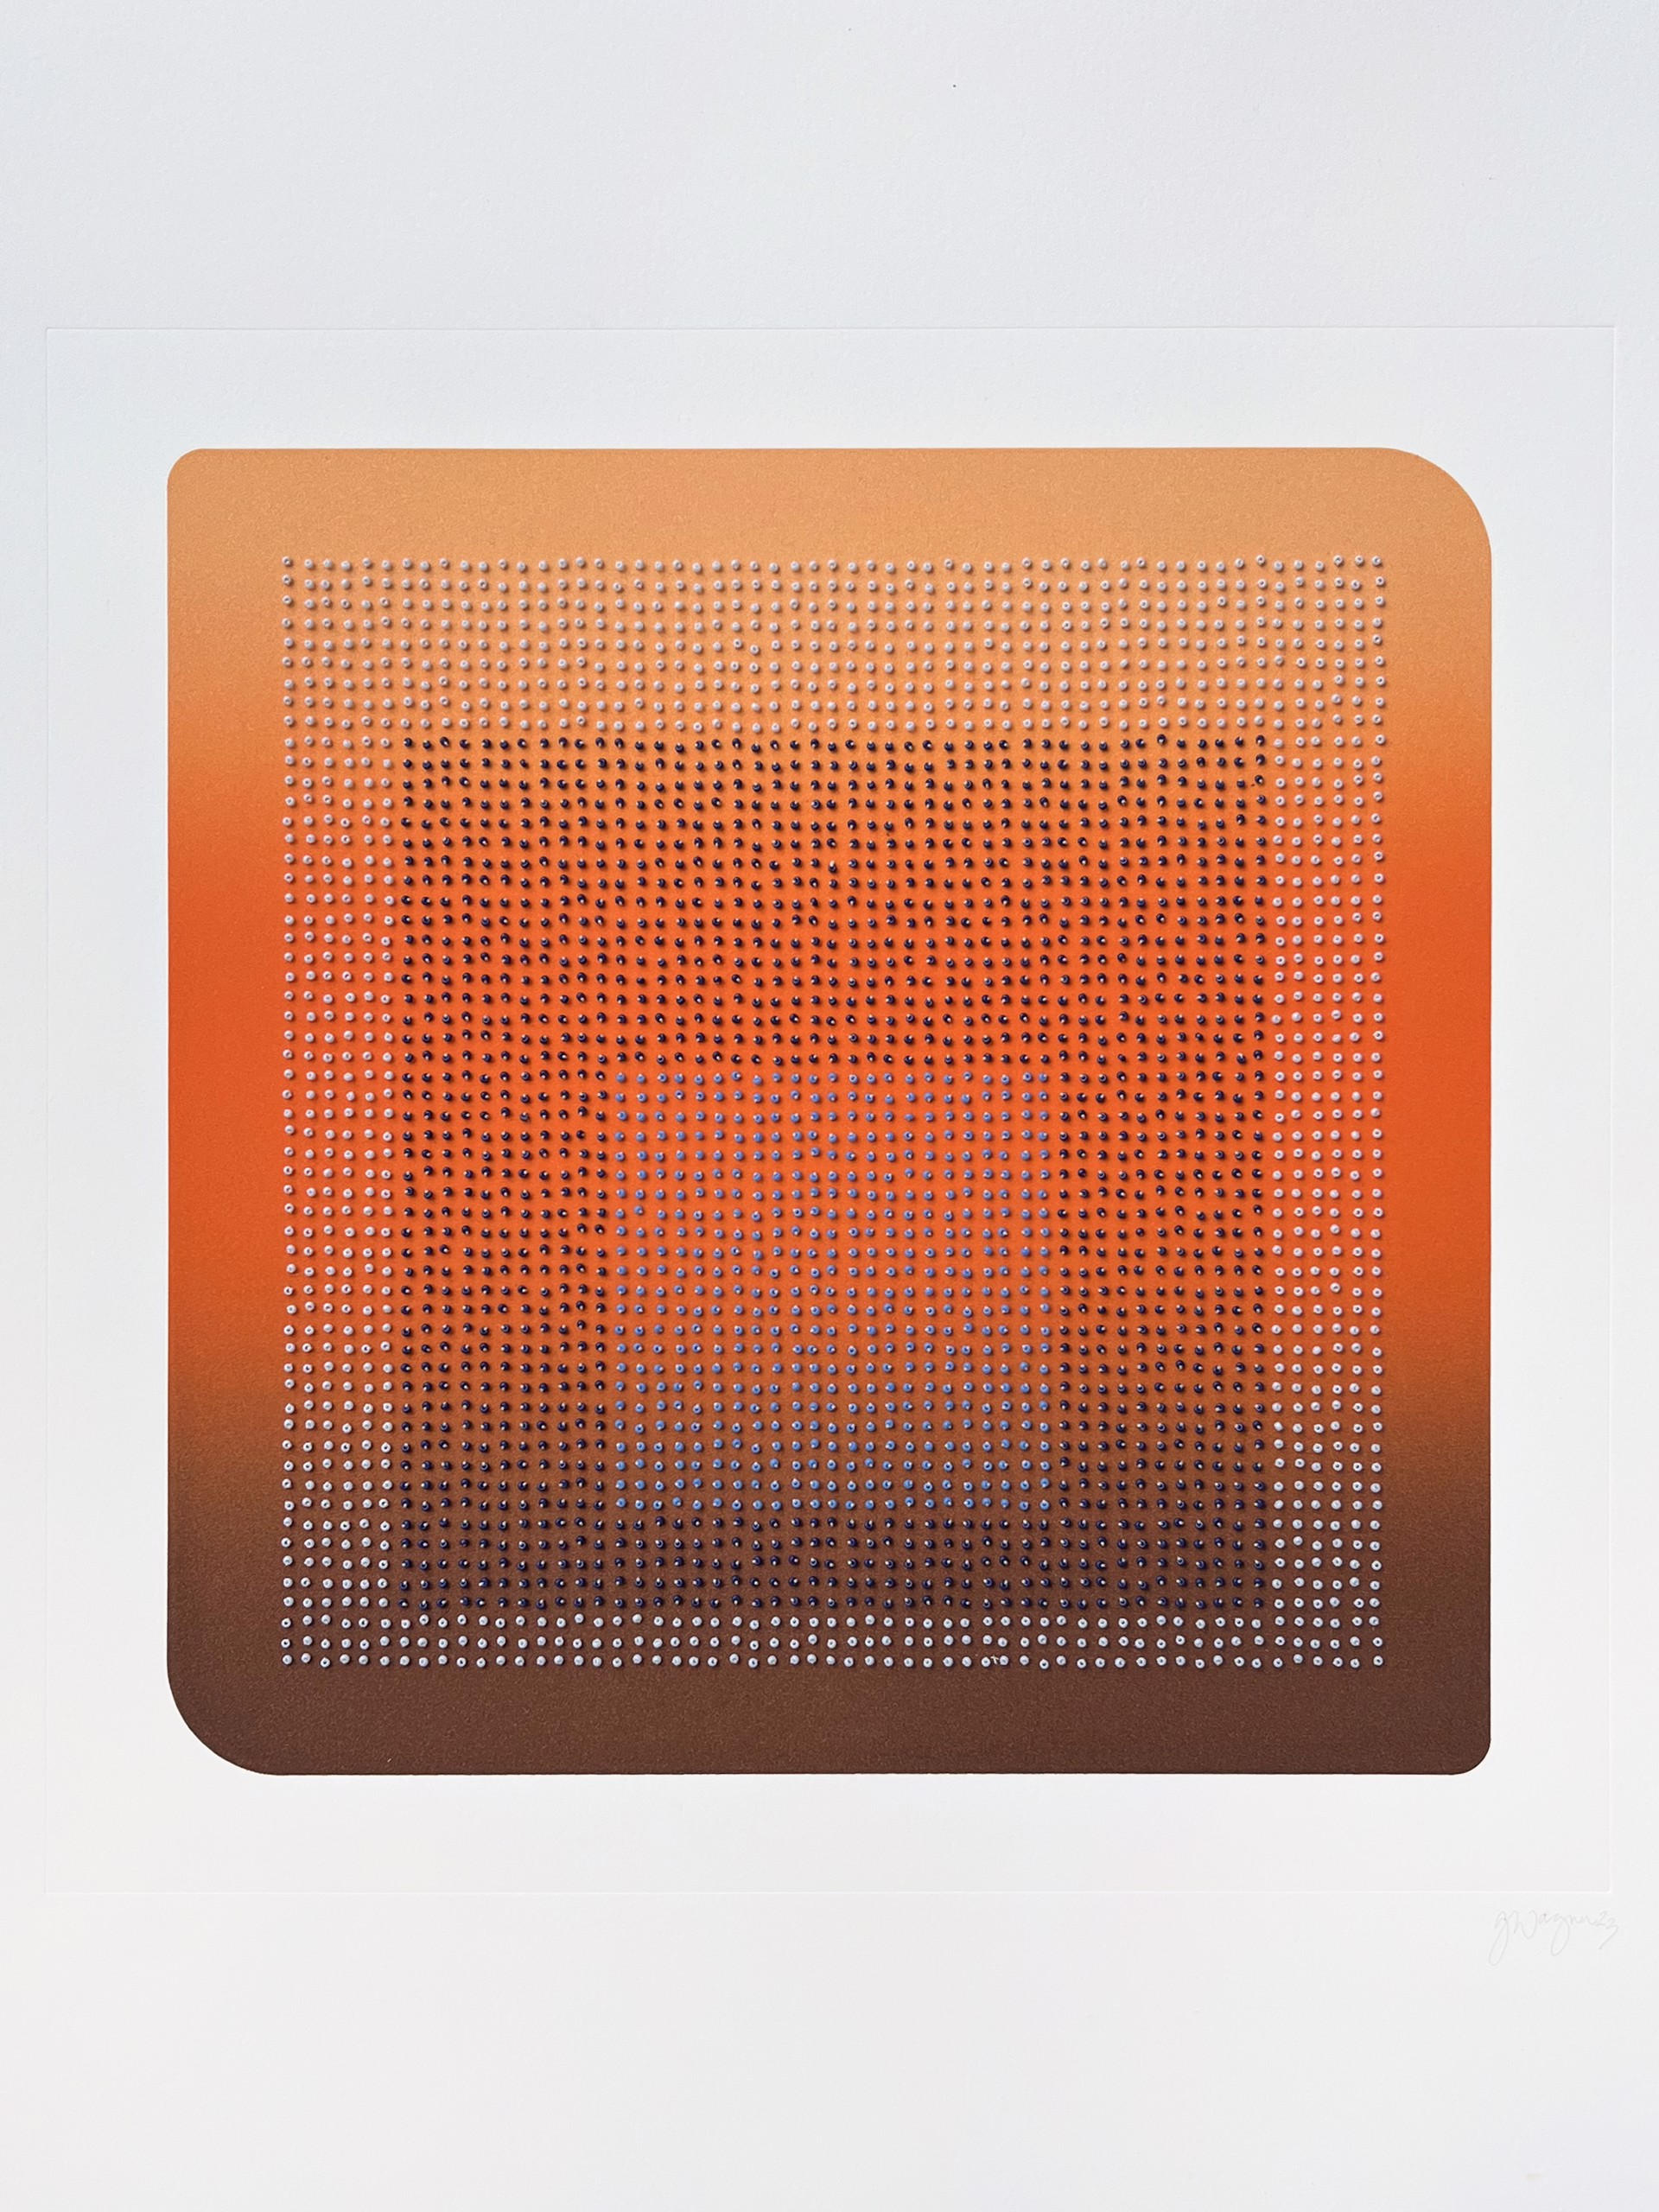 Homage to Albers (Orange) by Gretchen Wagner